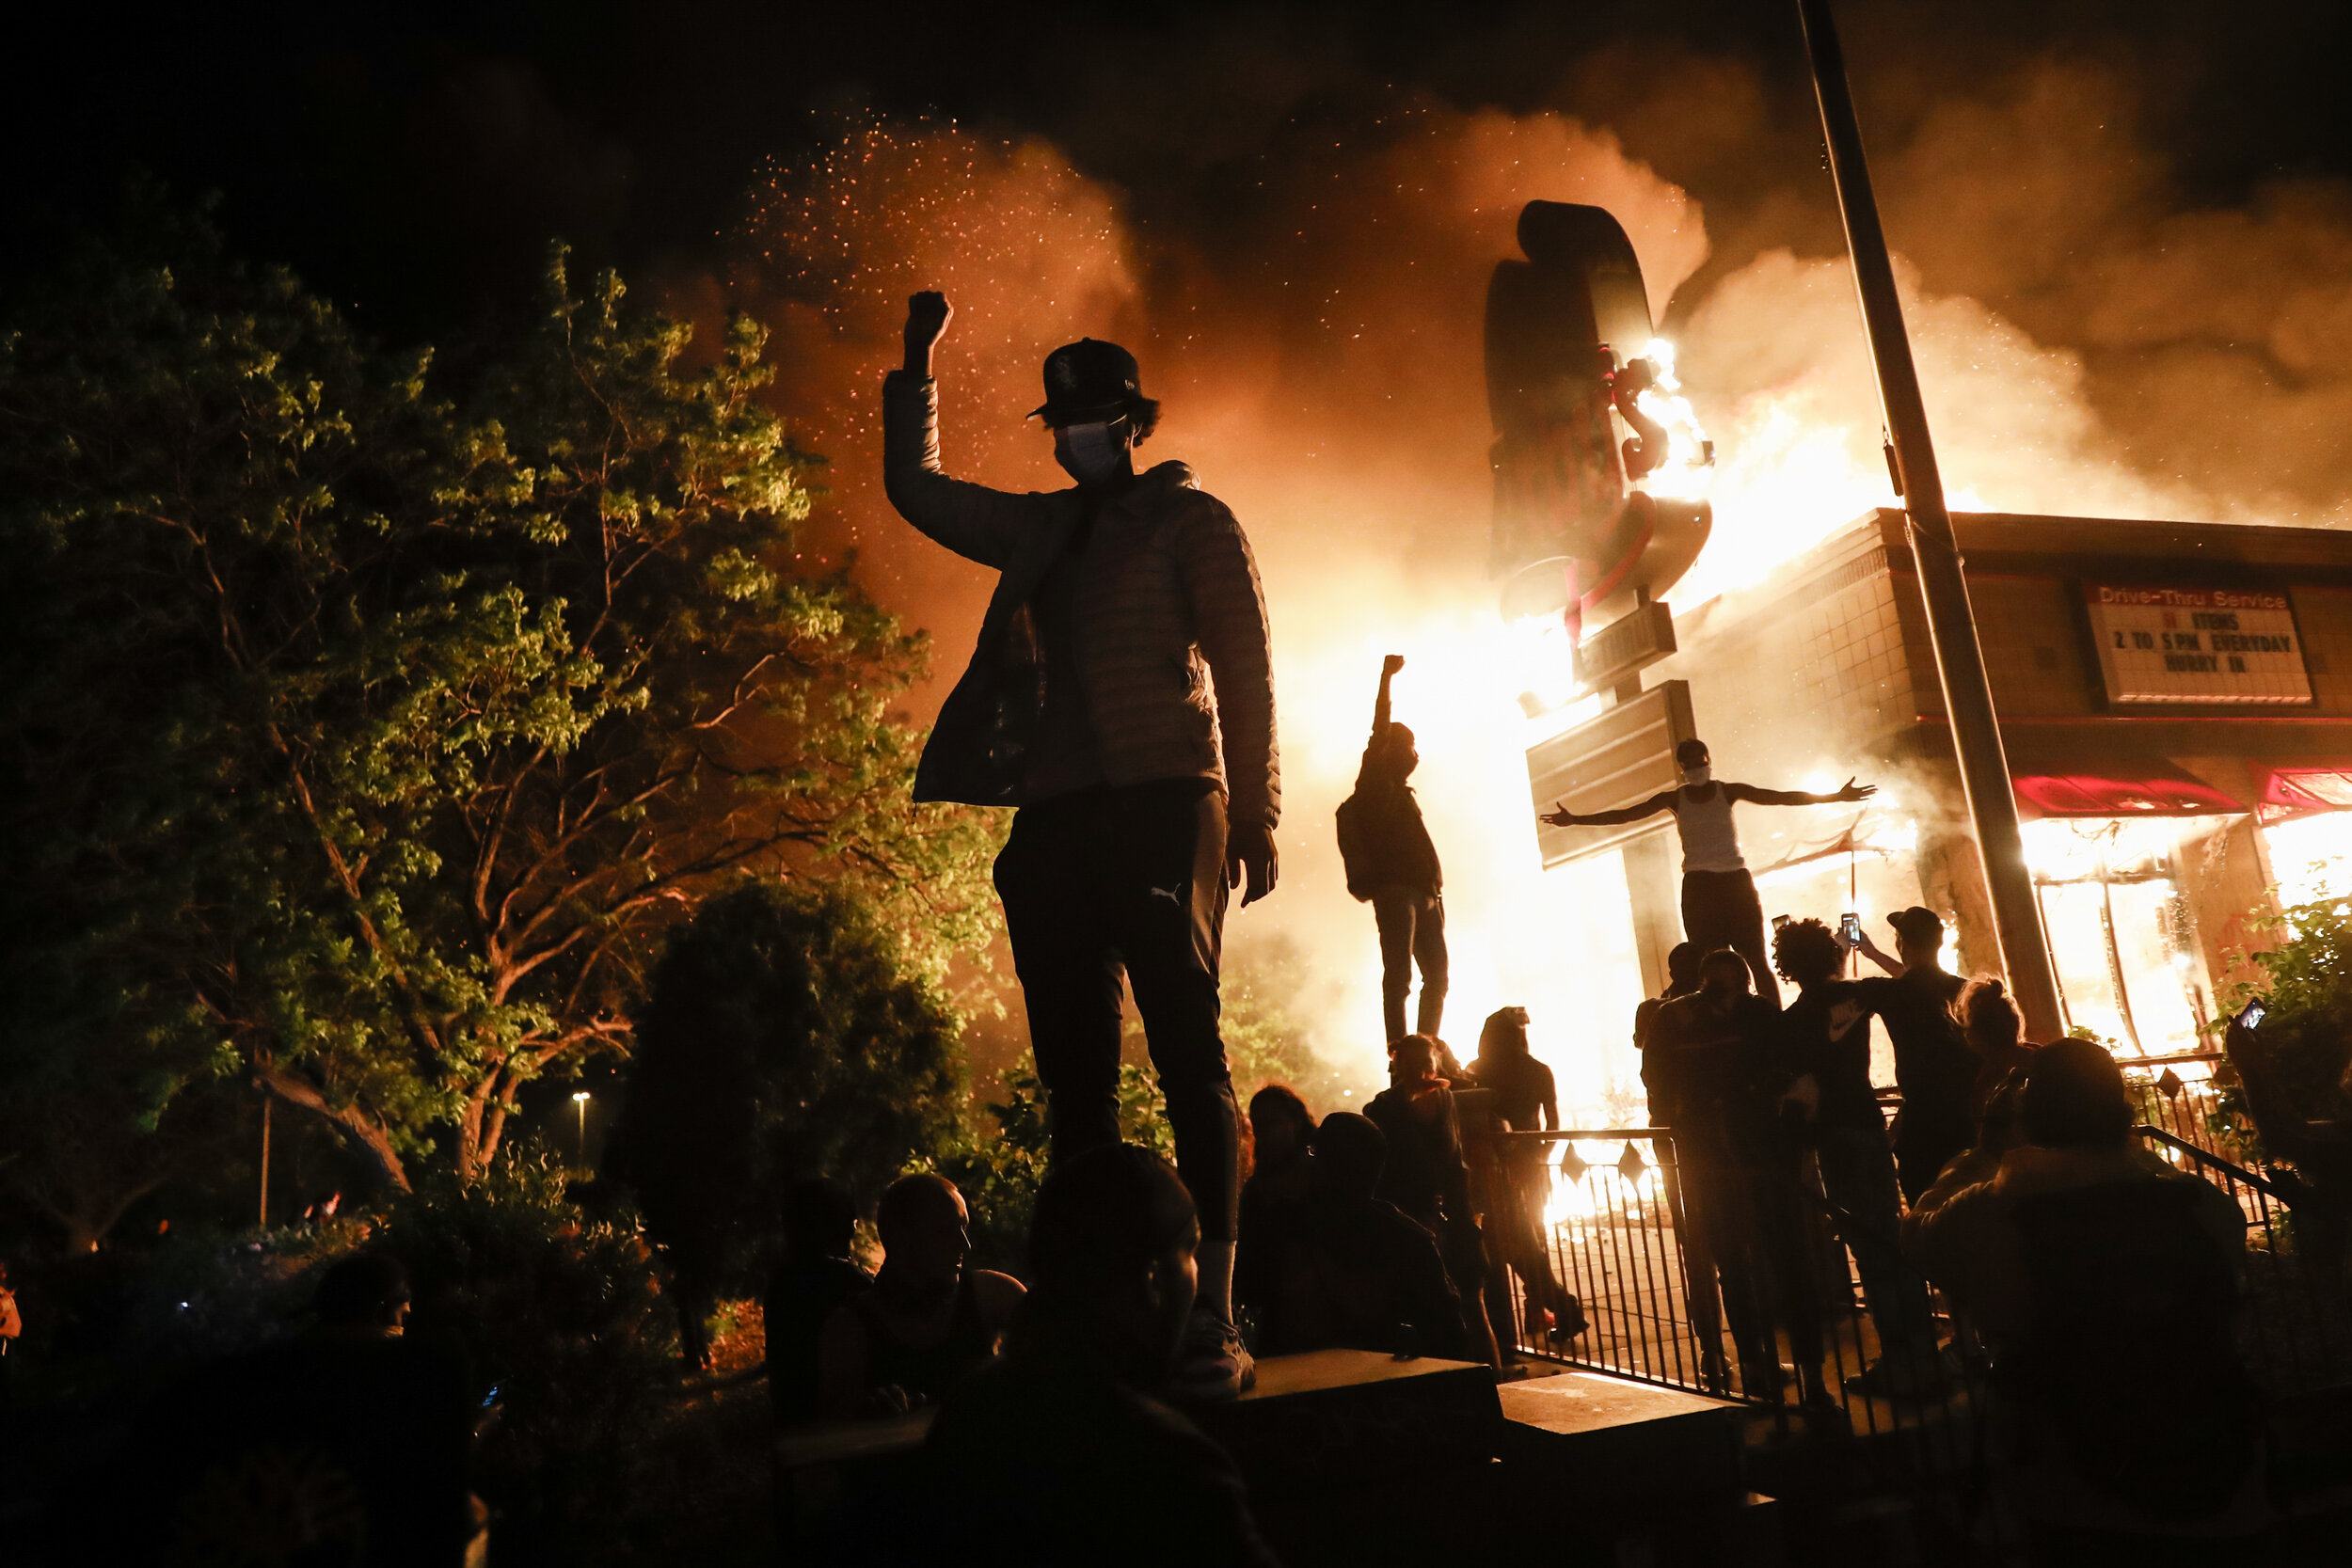  Protesters gather in front of a burning fast food restaurant, May 29, 2020, in Minneapolis. Protests over the death of George Floyd, a black man who died in police custody, broke out in Minneapolis for a third straight night. (AP Photo/John Minchill